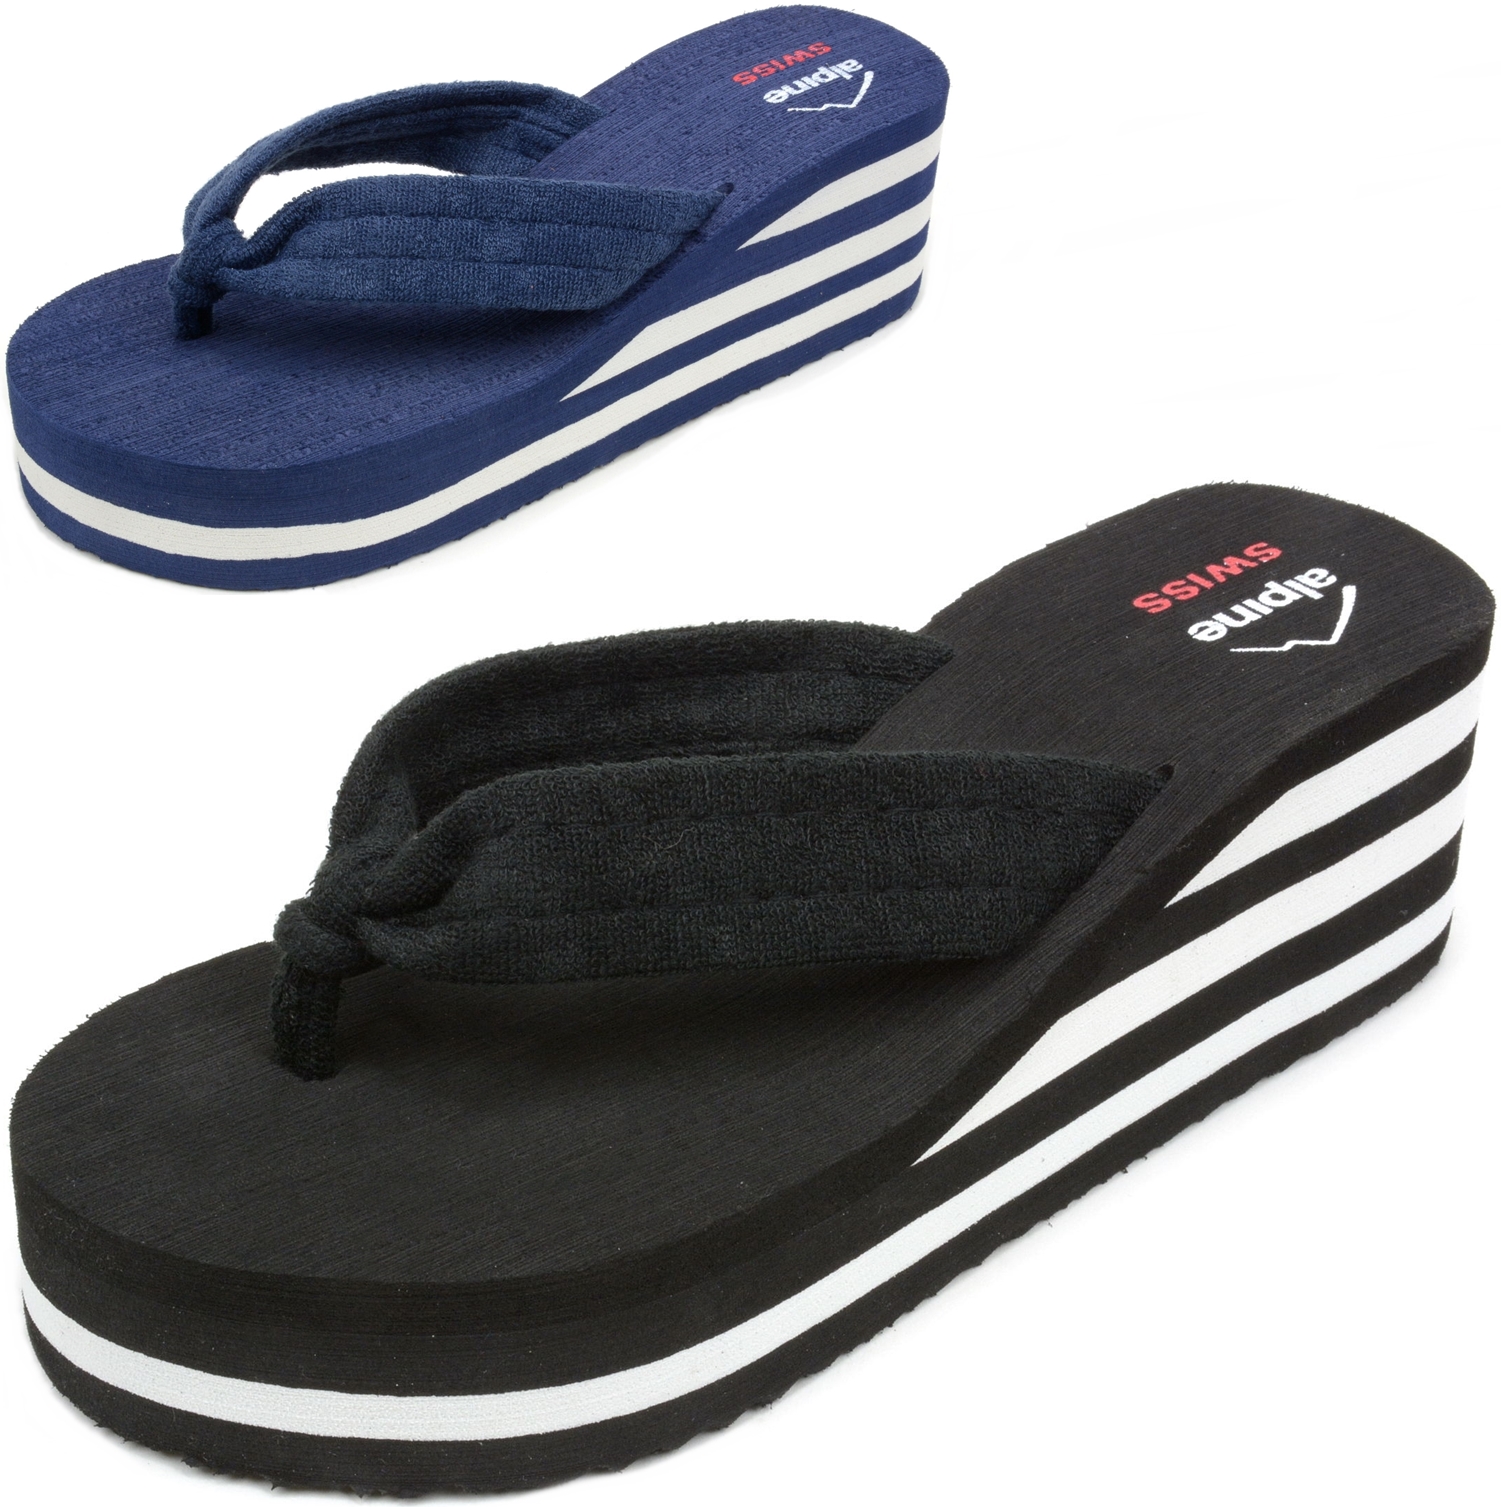 Alpine Swiss Terry Cloth Wedge Flip Flops Only $7.99 Shipped!!